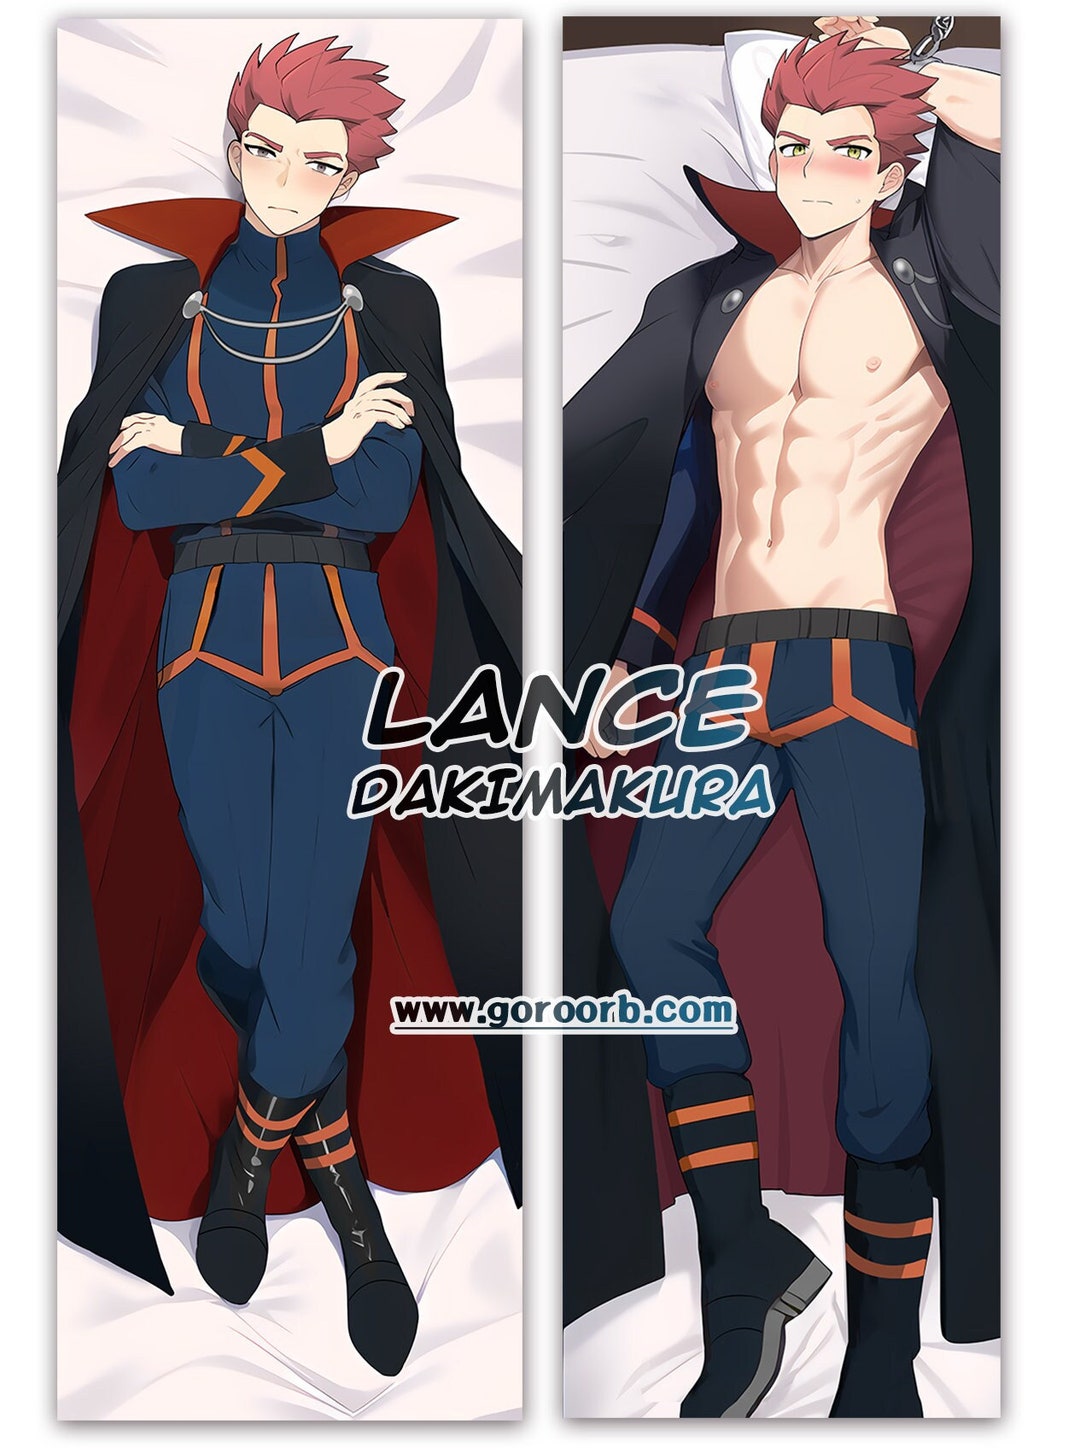 Who is the champion of the Kanto region IN THE ANIME Its not Lance   rpokemonanime